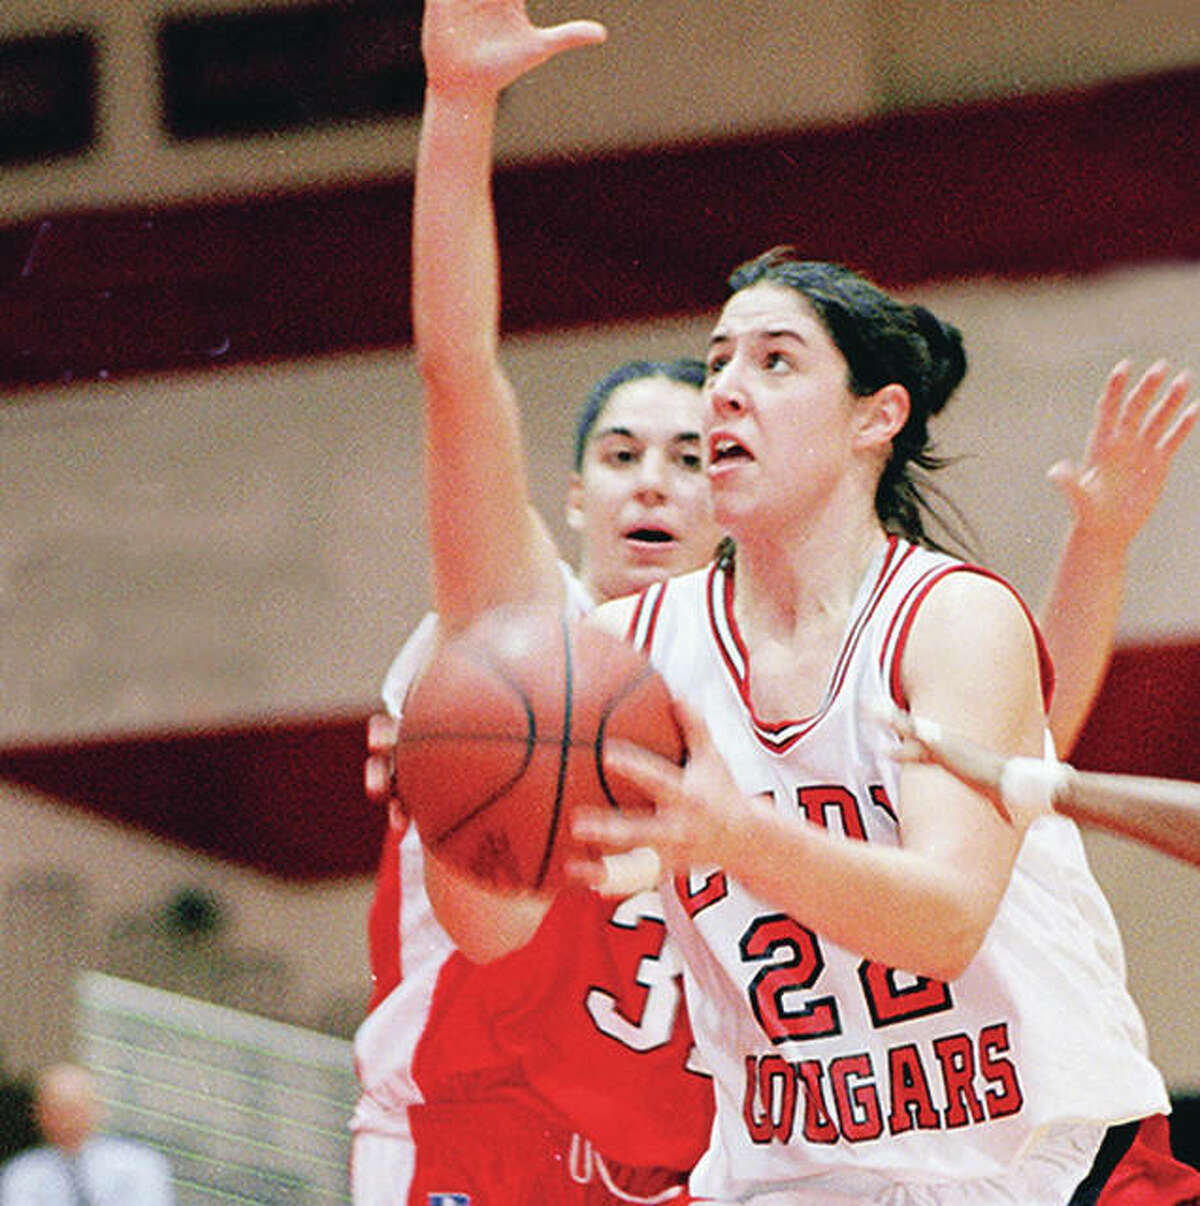 Former Cougars standout Alicia Harkins has been named to the Indiana Basketball Hall of Fame Silver Anniversary Team. She played at SIUE from 1995 to 1998.